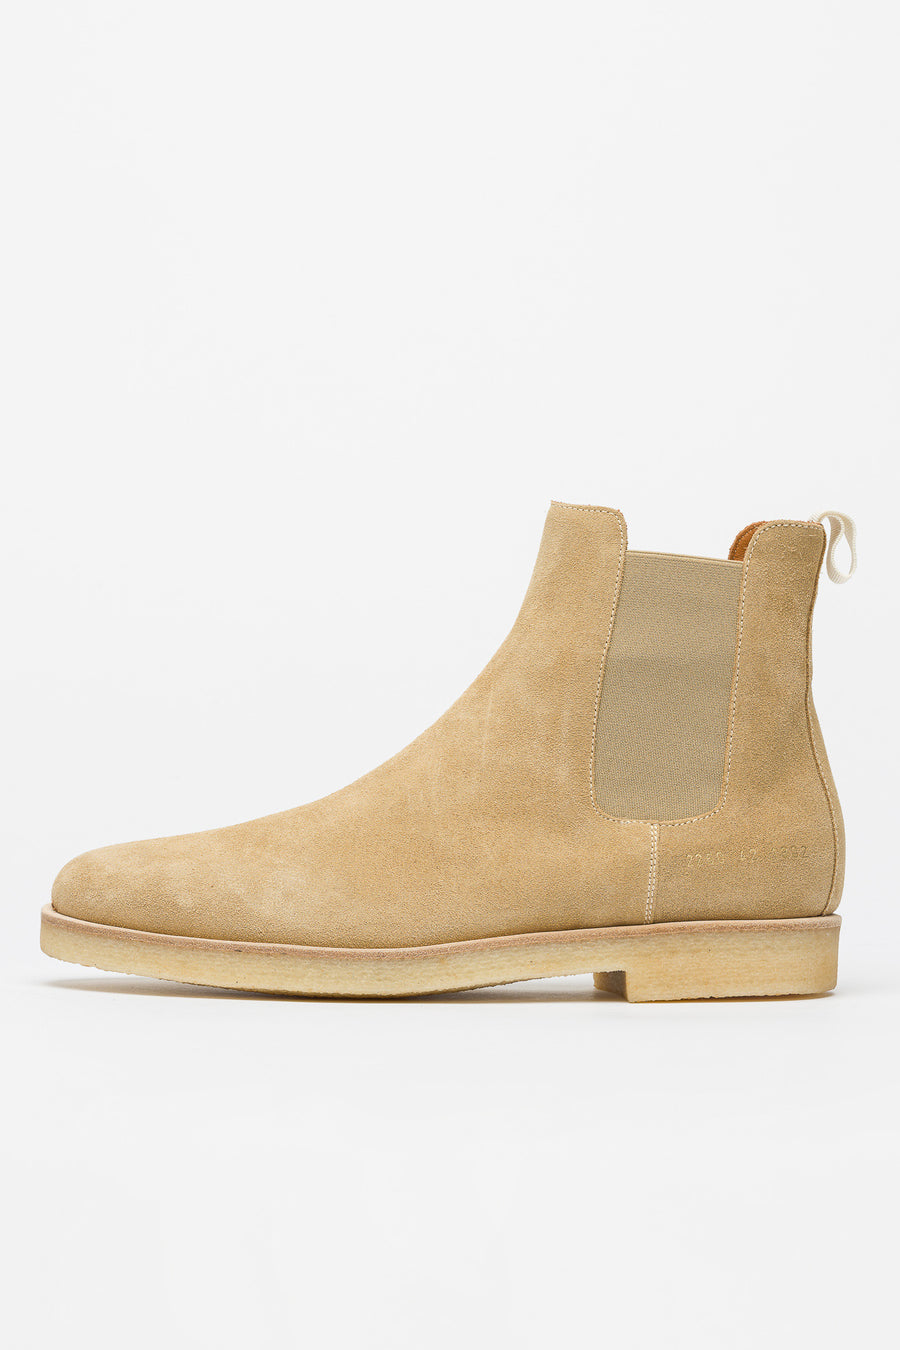 common projects tan suede chelsea boots